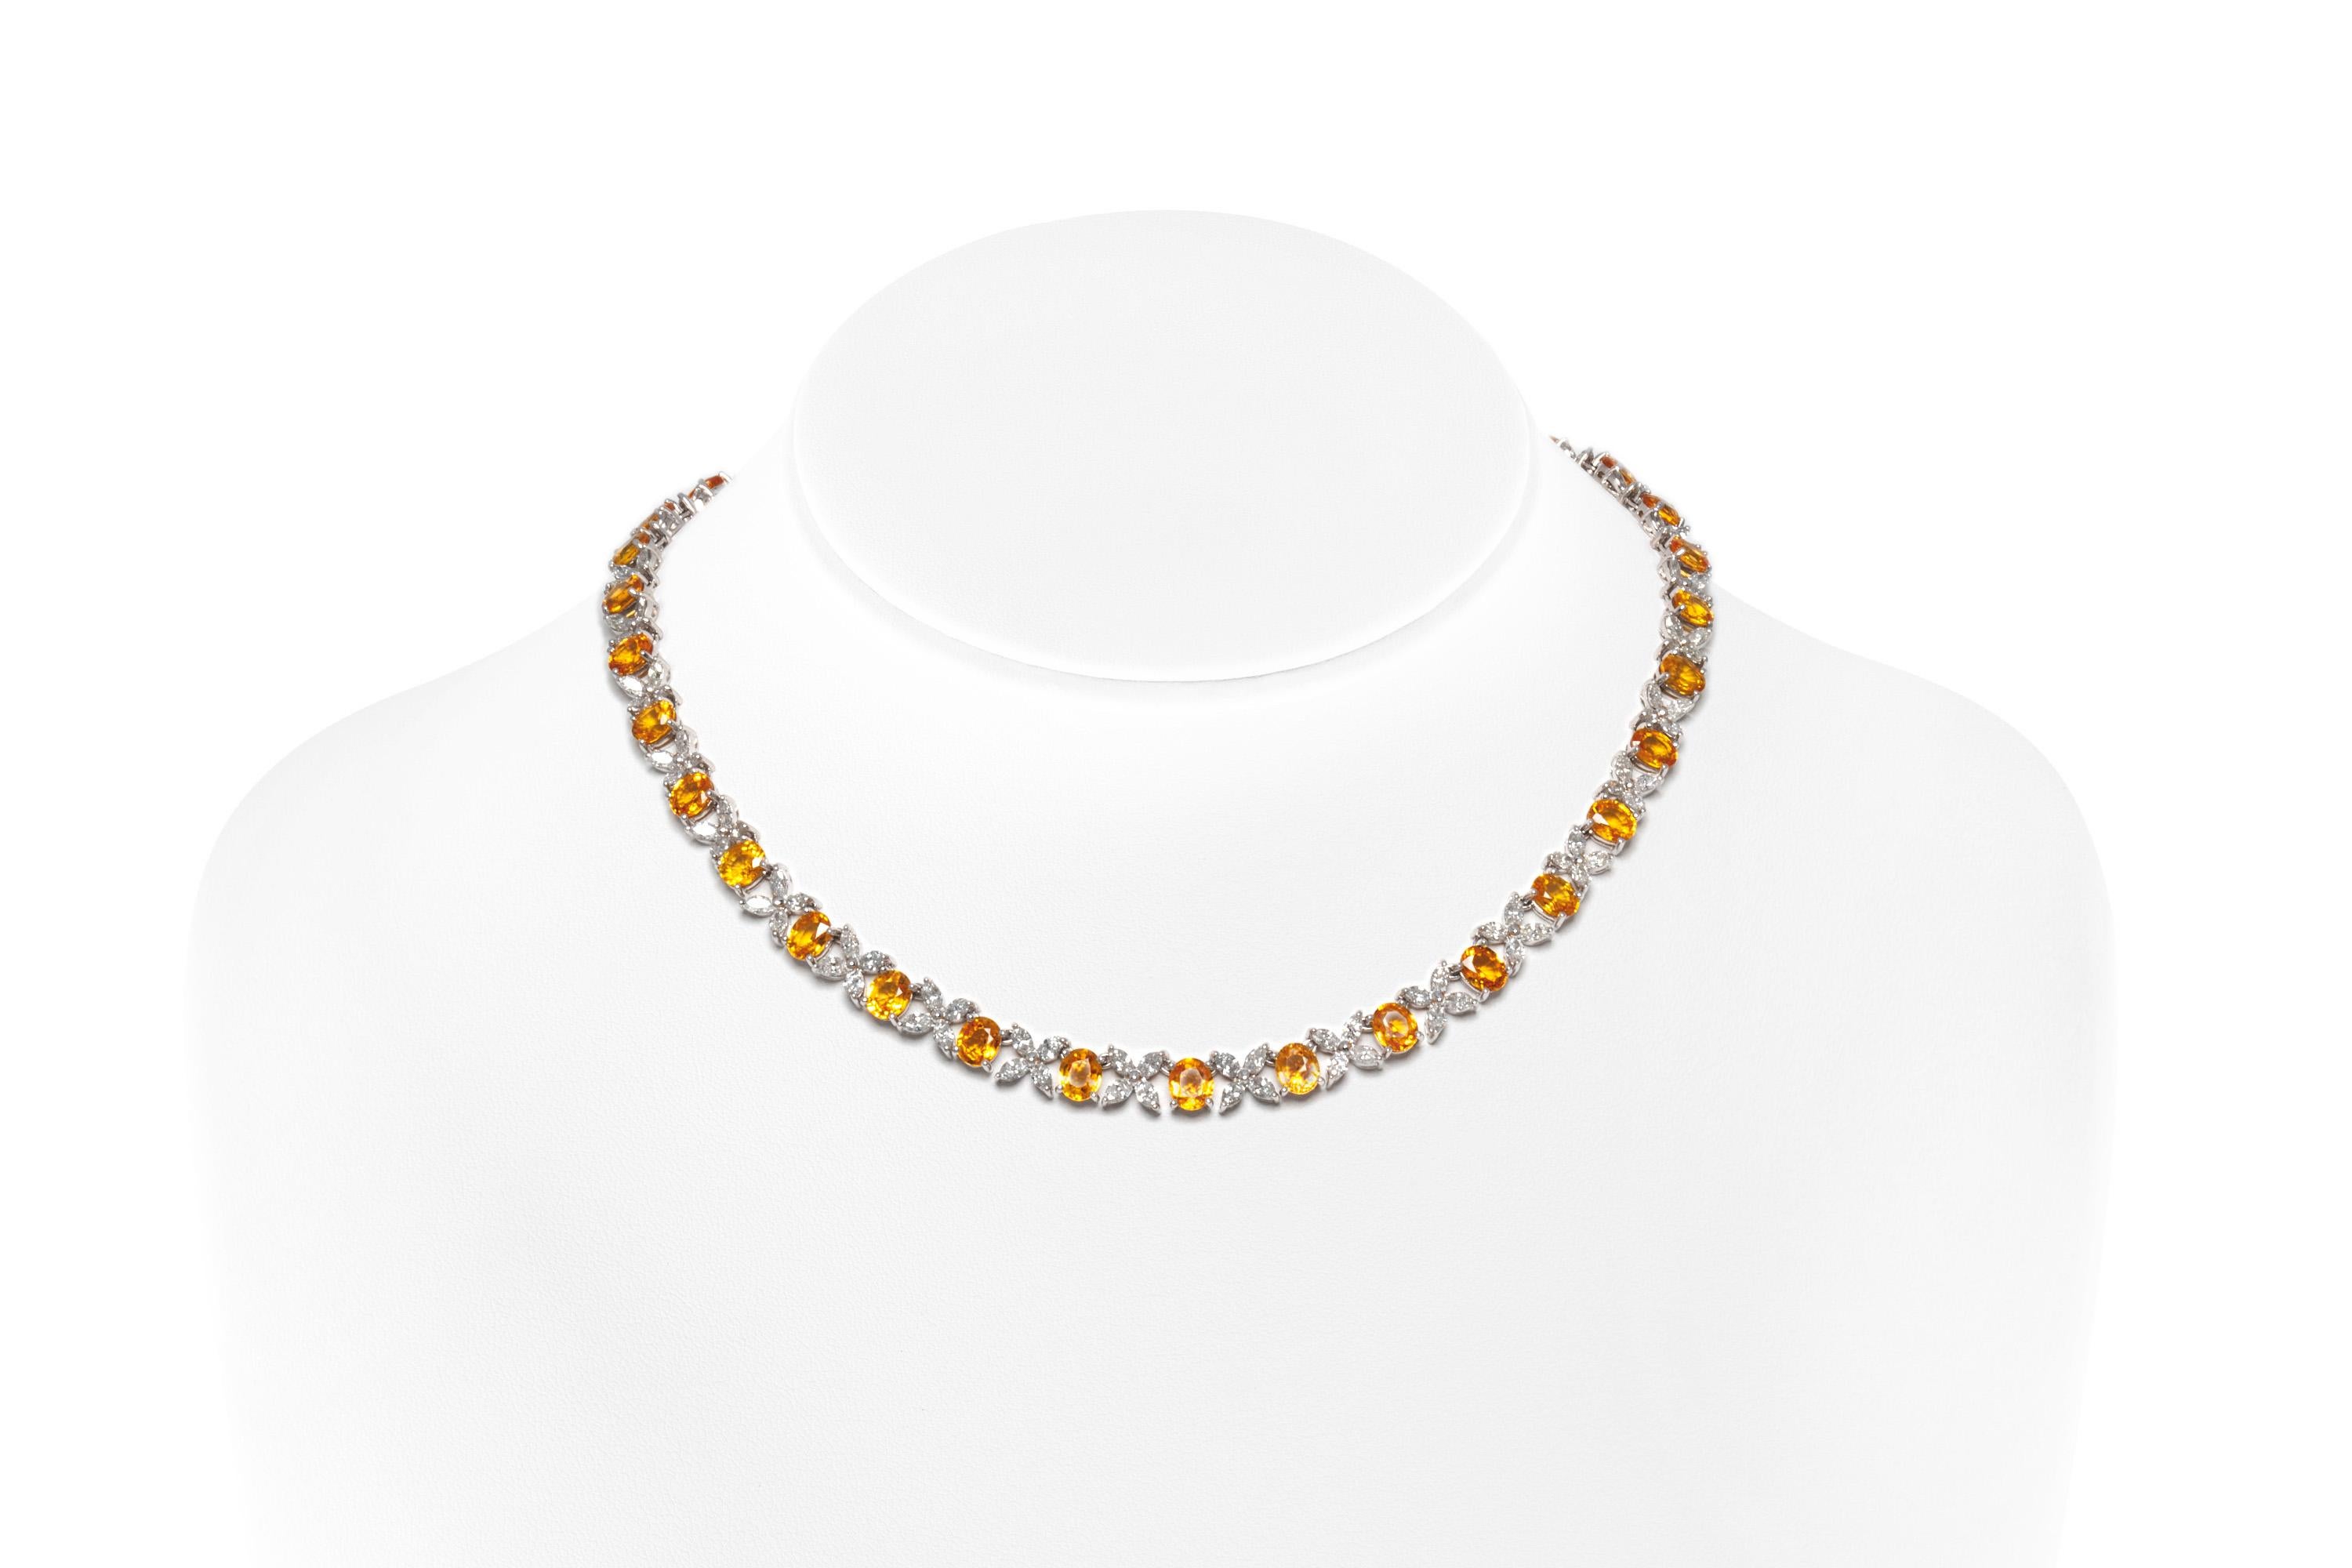 yellow sapphire necklace designs